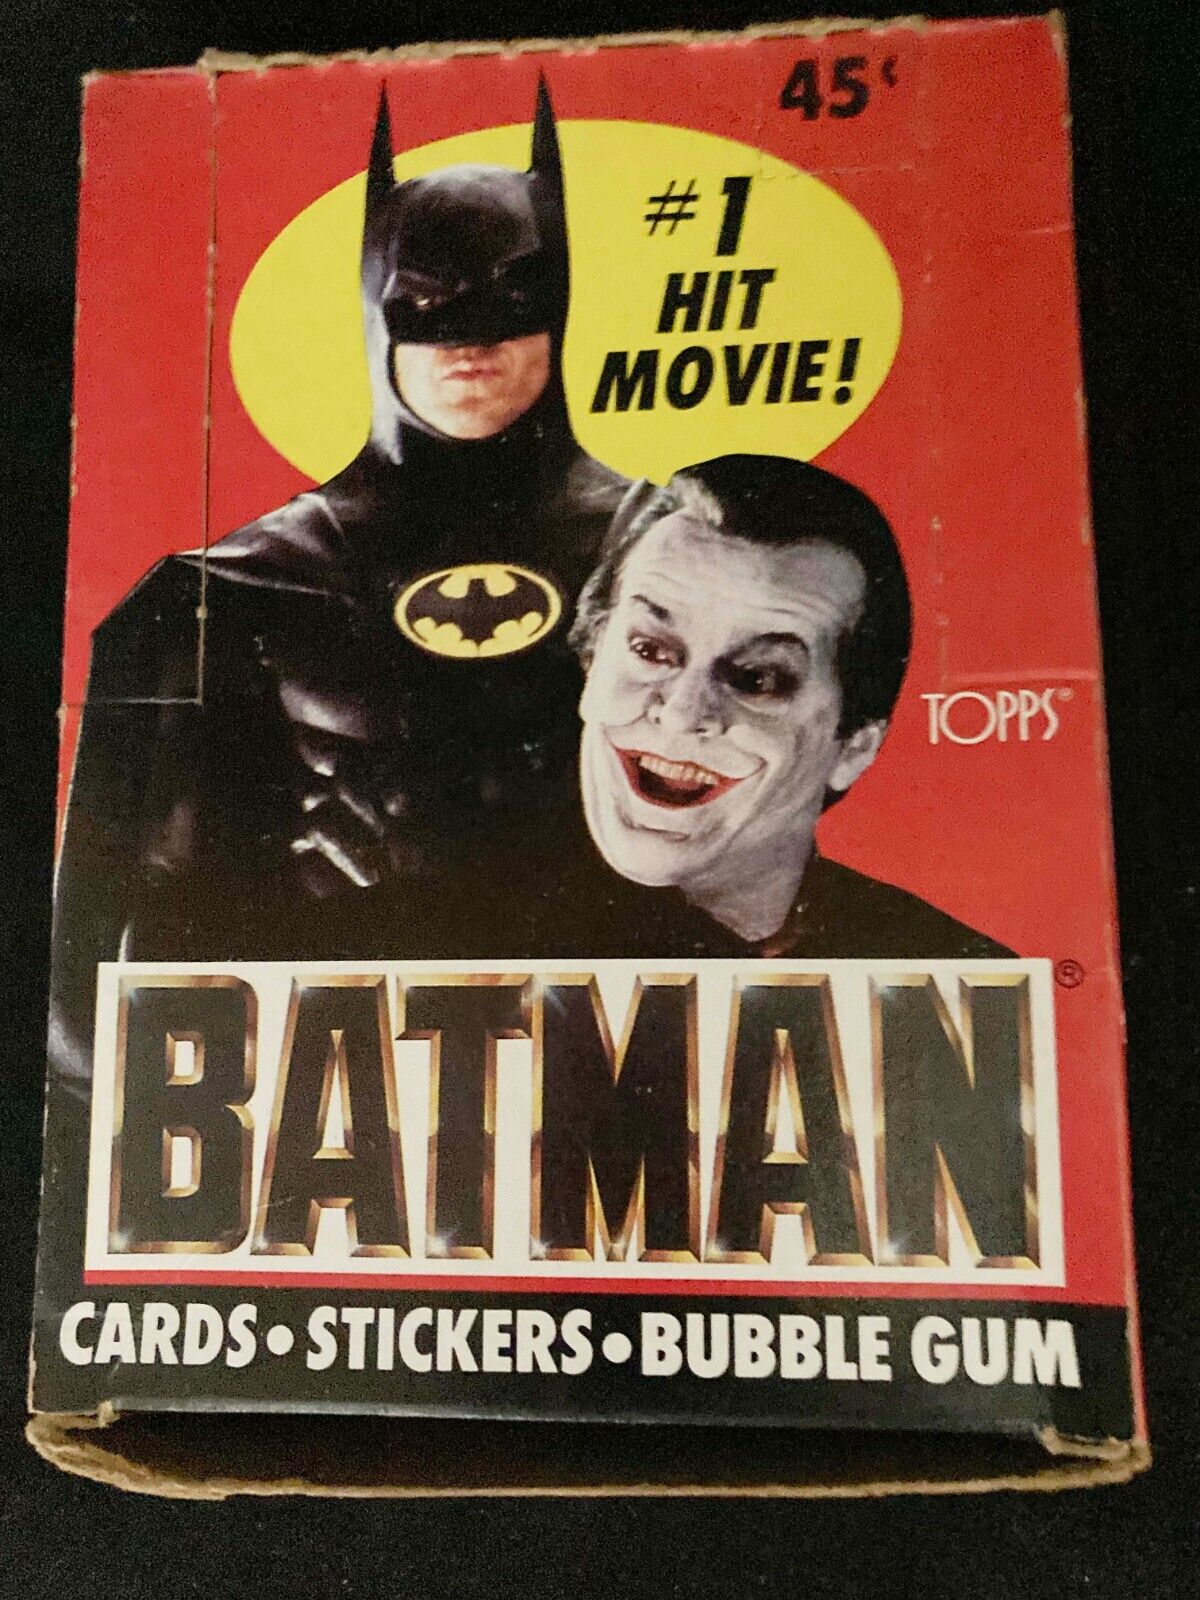 1989 Topps Batman 1rst Series Opened 350 card/stickers count Michael Keaton